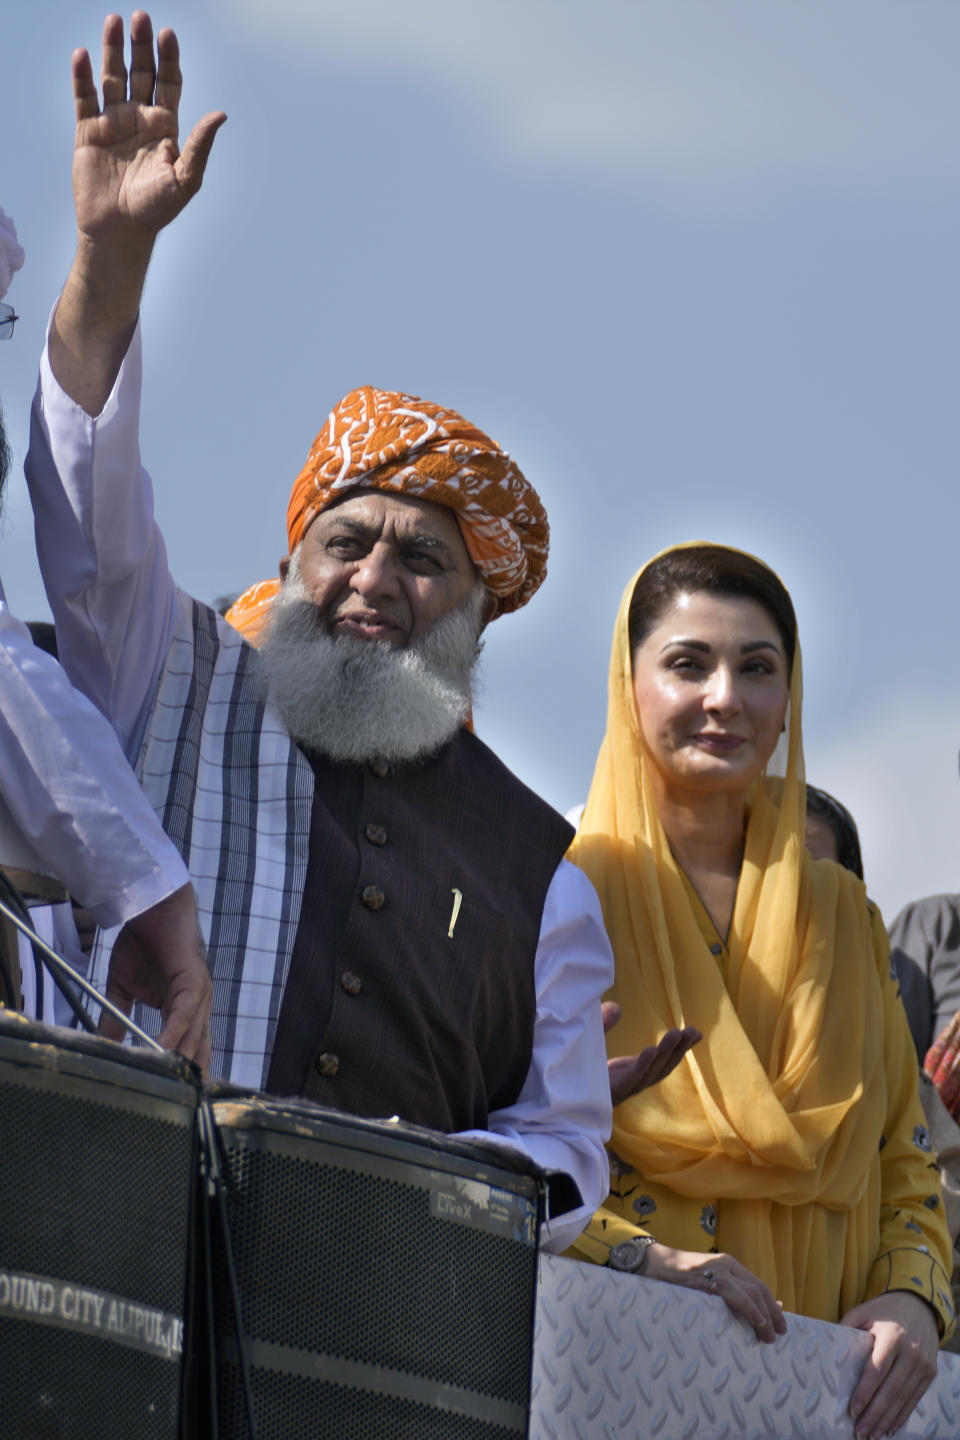 Maulana Fazalur Rehman, left, and Maryam Nawaz, right, leaders of Pakistan Democratic Alliance, wave to supporters during a protest outside the Supreme Court, in Islamabad, Pakistan, Monday, May 15, 2023. Thousands of Pakistani government supporters converged on the country's Supreme Court, in a rare challenge to the nation's judiciary. Protesters demanded the resignation of the chief justice over ordering the release of former Prime Minister Imran Khan. (AP Photo/Anjum Naveed)